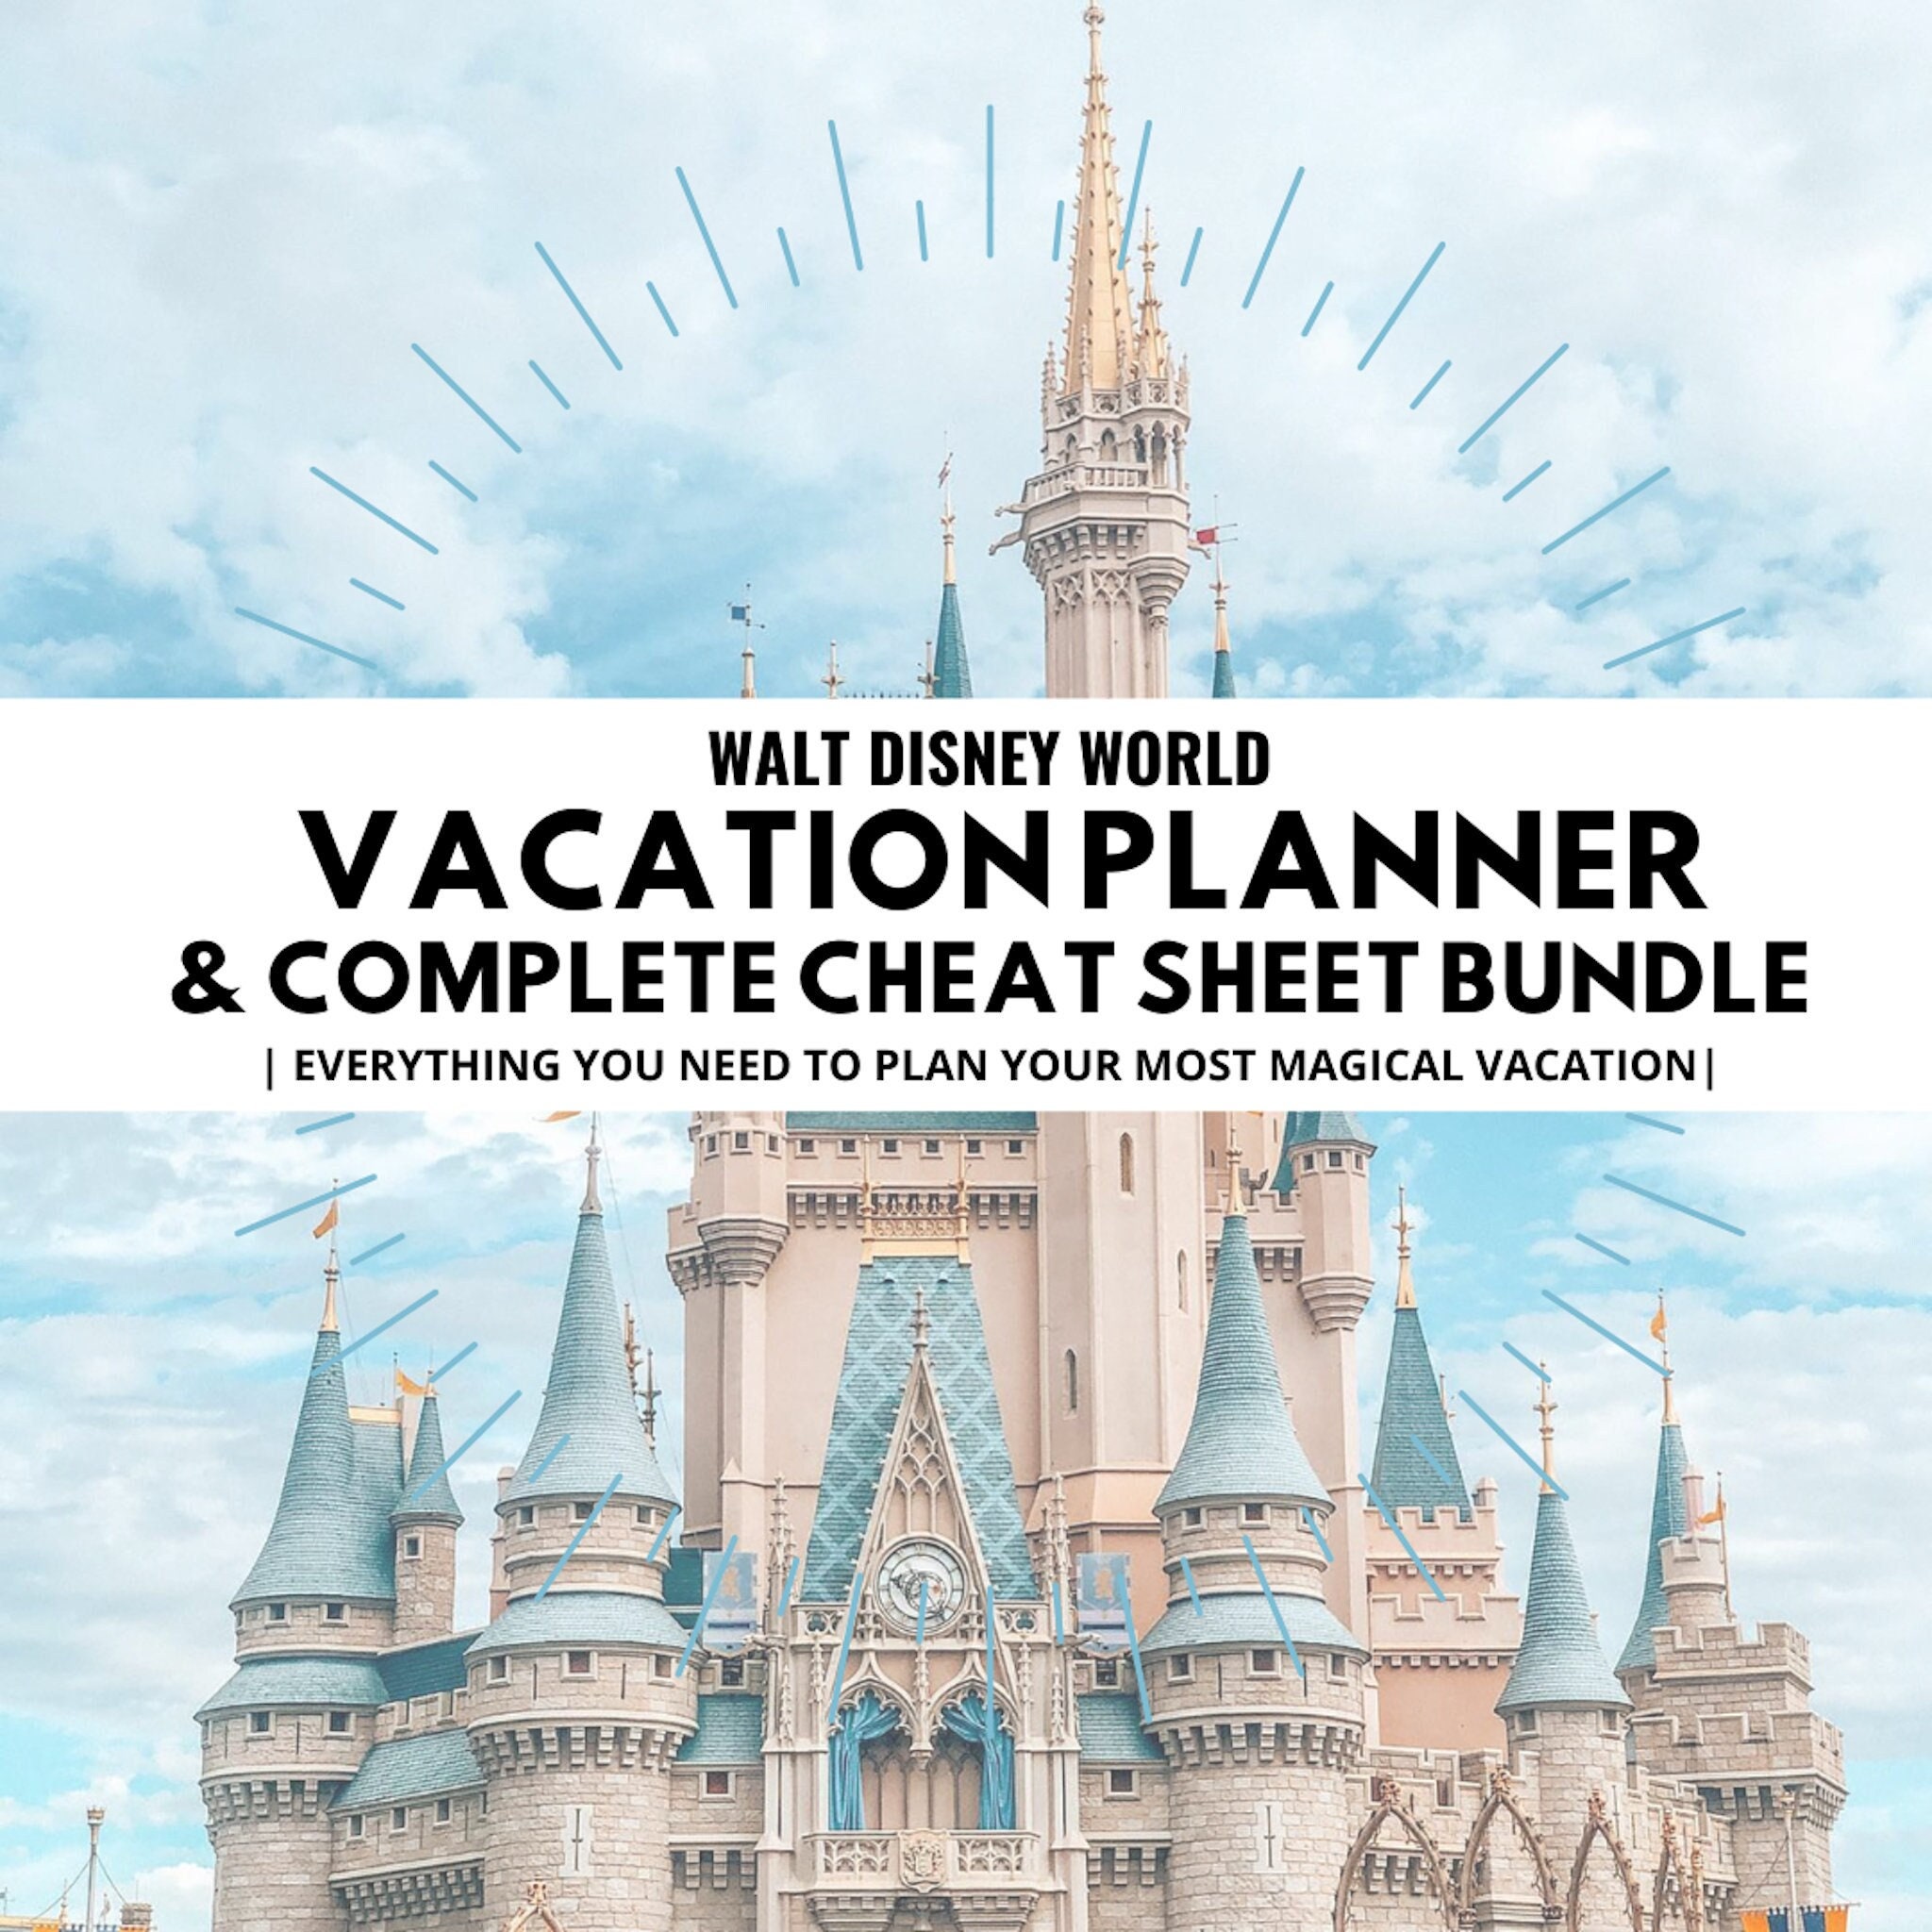 Disneyworld Vacation Planner With Complete Cheat Sheet Bundle